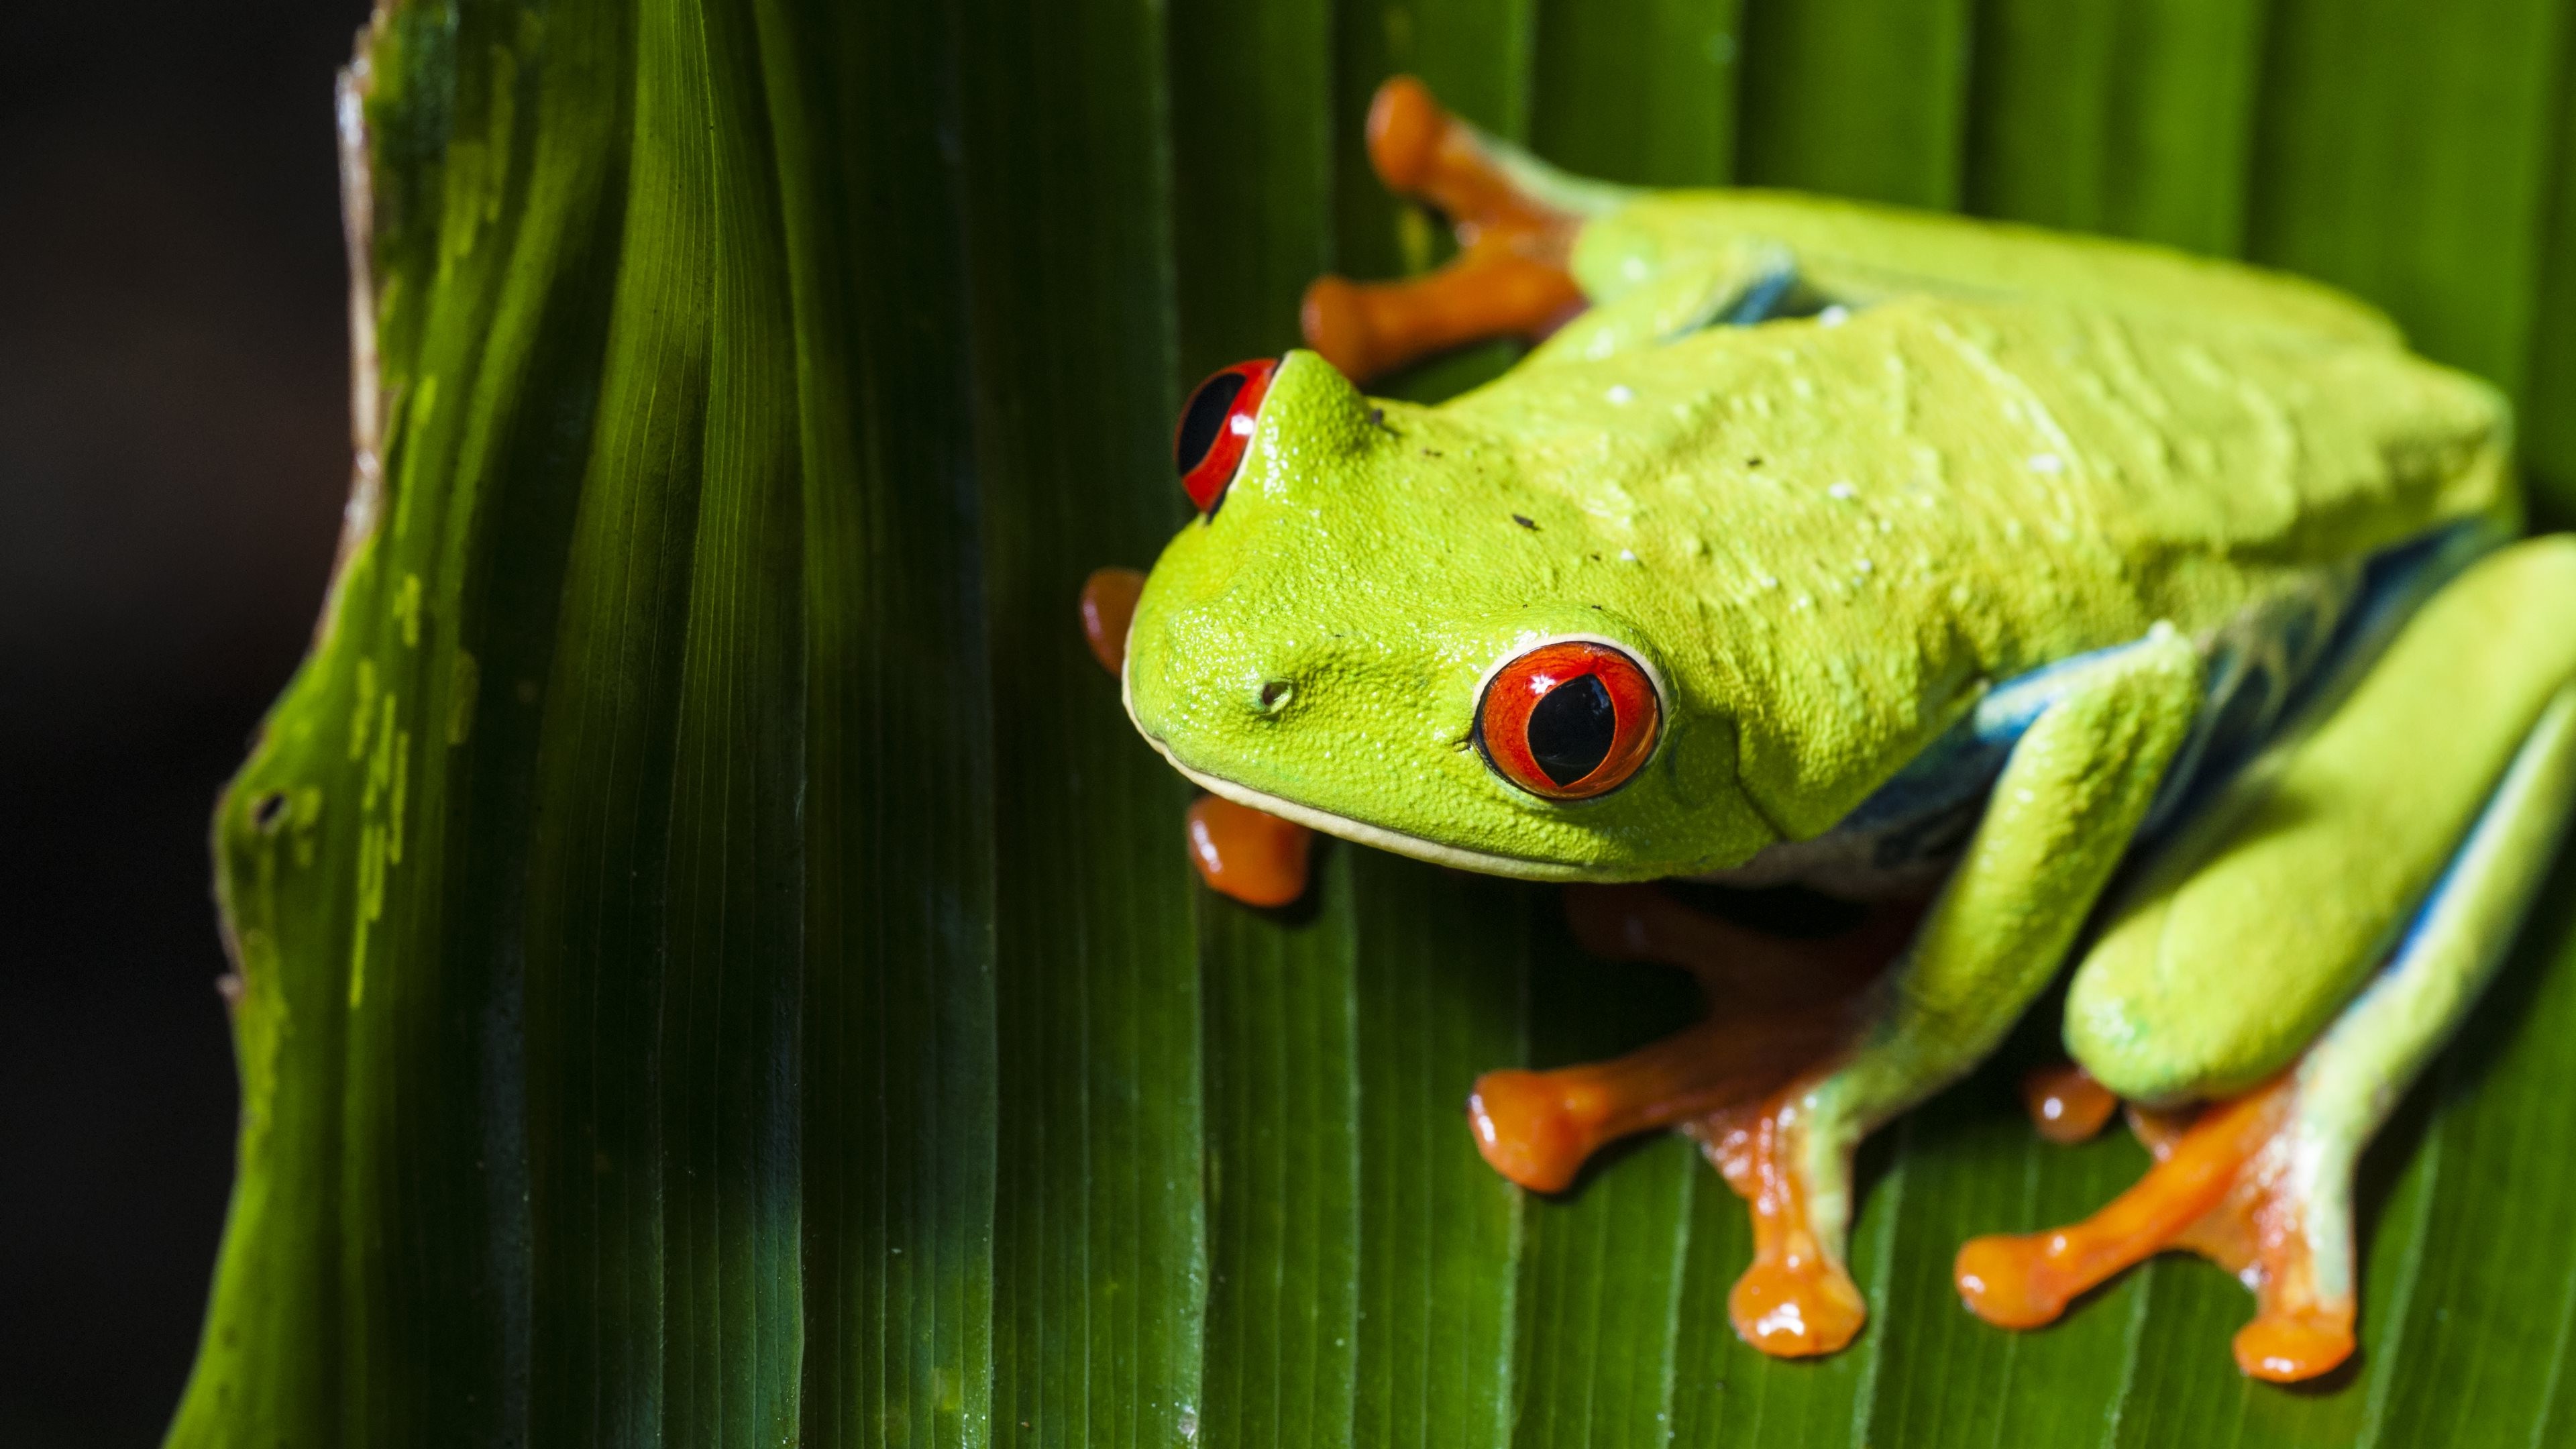 Wallpaper : animals, nature, green, amphibian, Red Eyed Tree Frogs ...